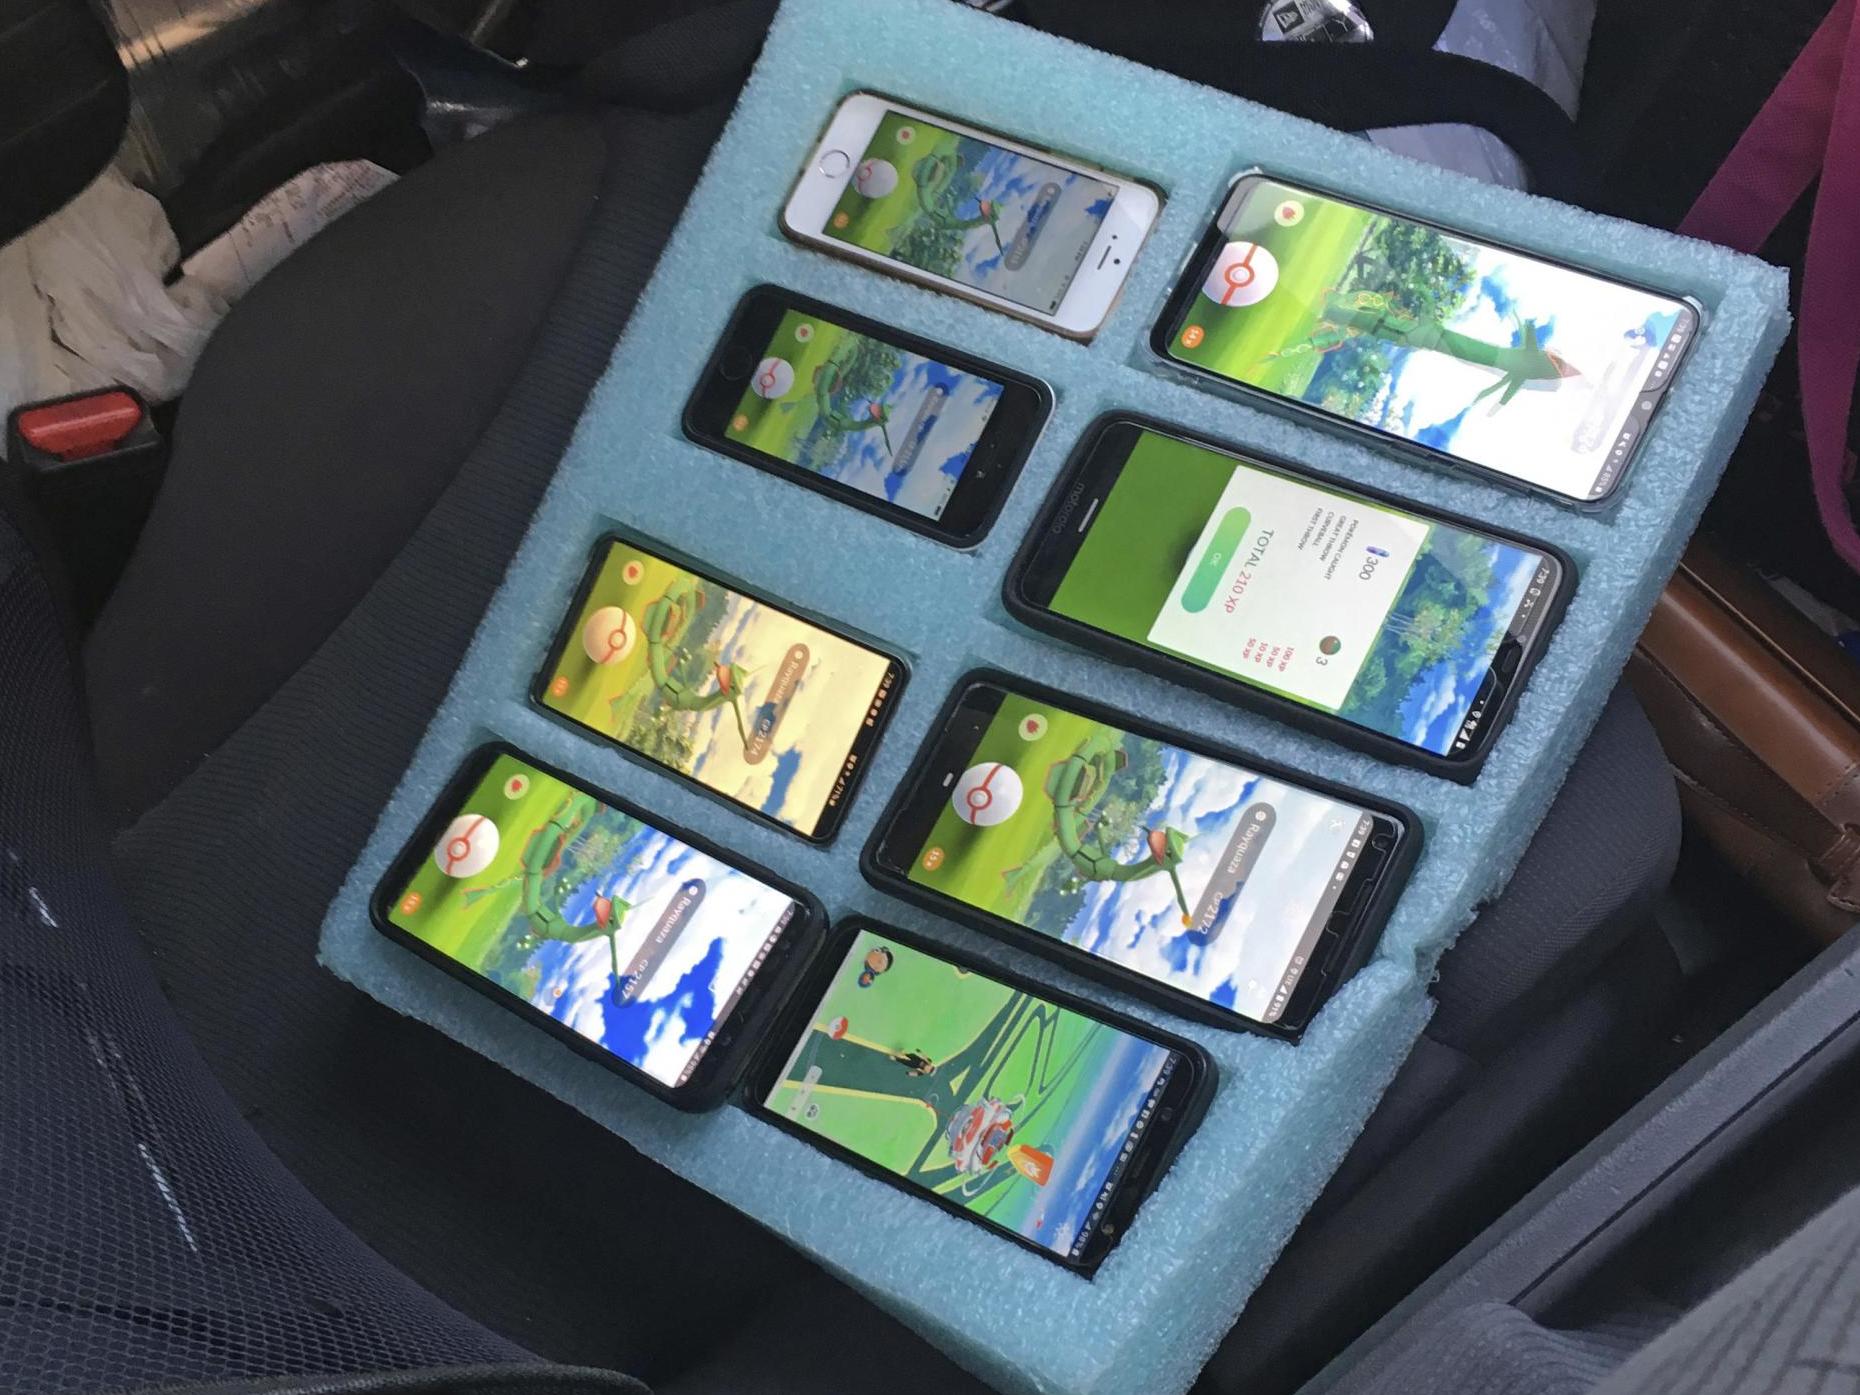 The system one driver, who was pulled over, was using to play Pokemon Go on eight phones at once in Washington state.